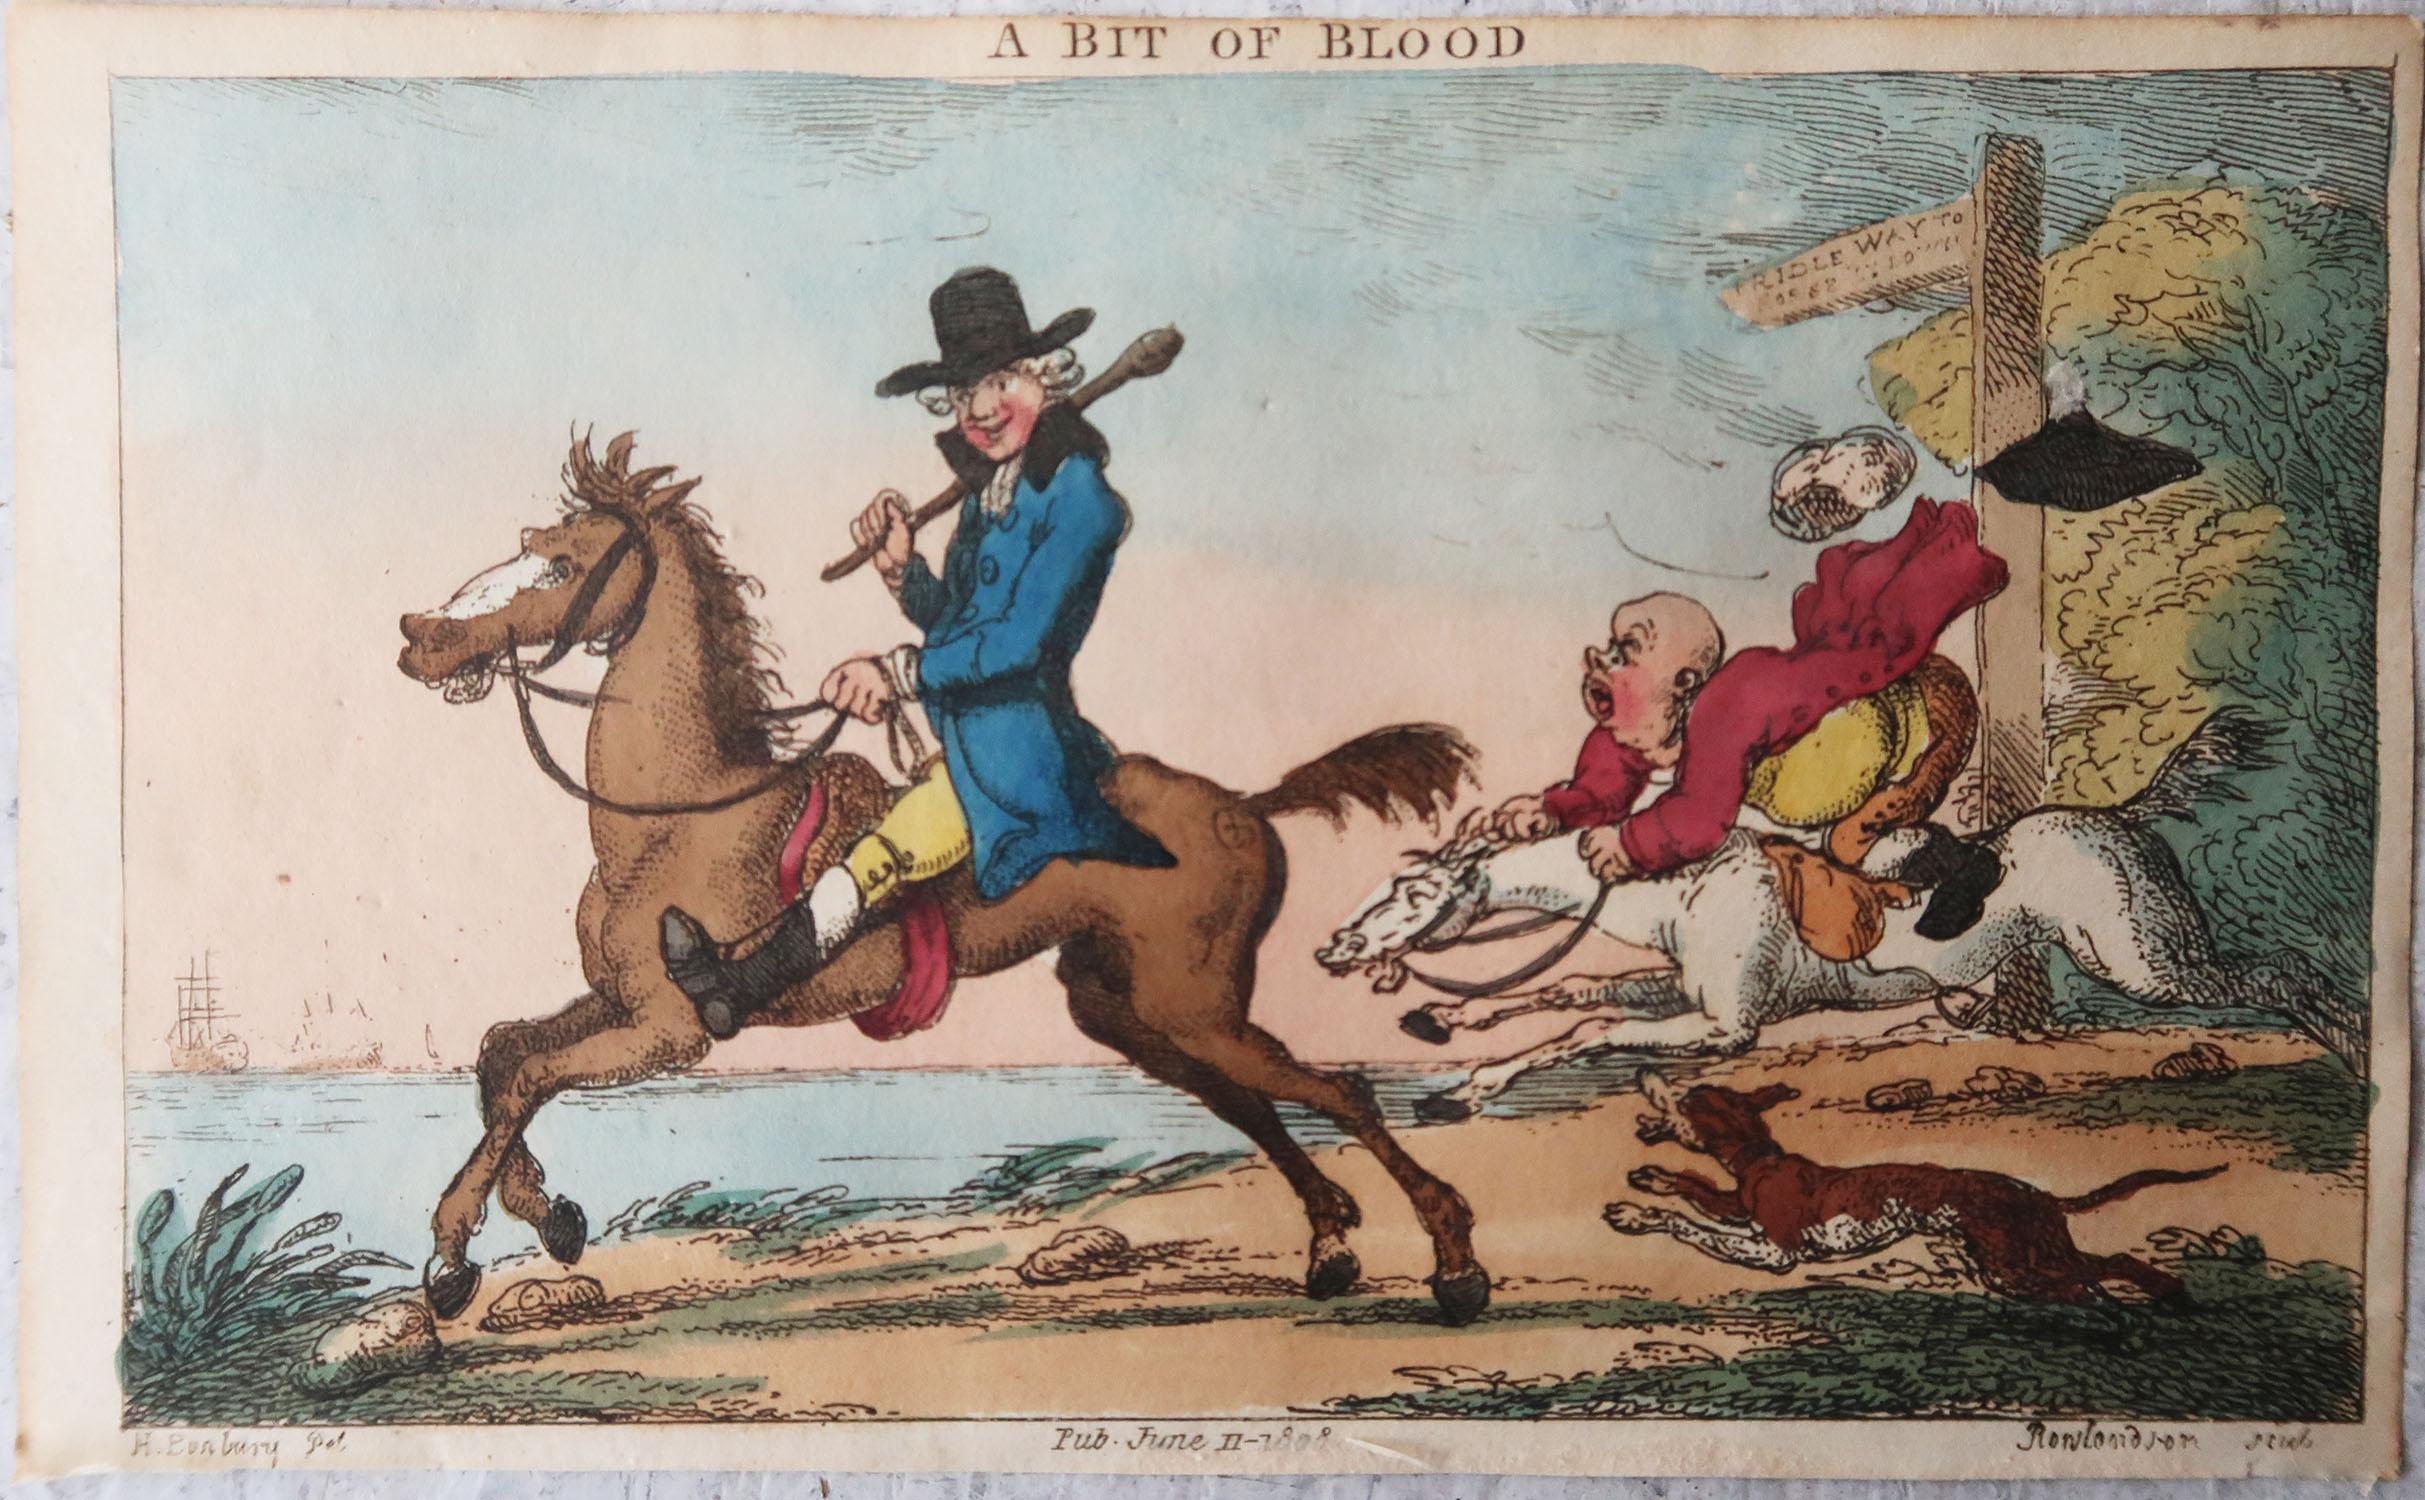 English Original Antique Print After Thomas Rowlandson, Bit of Blood, Dated 1808 For Sale